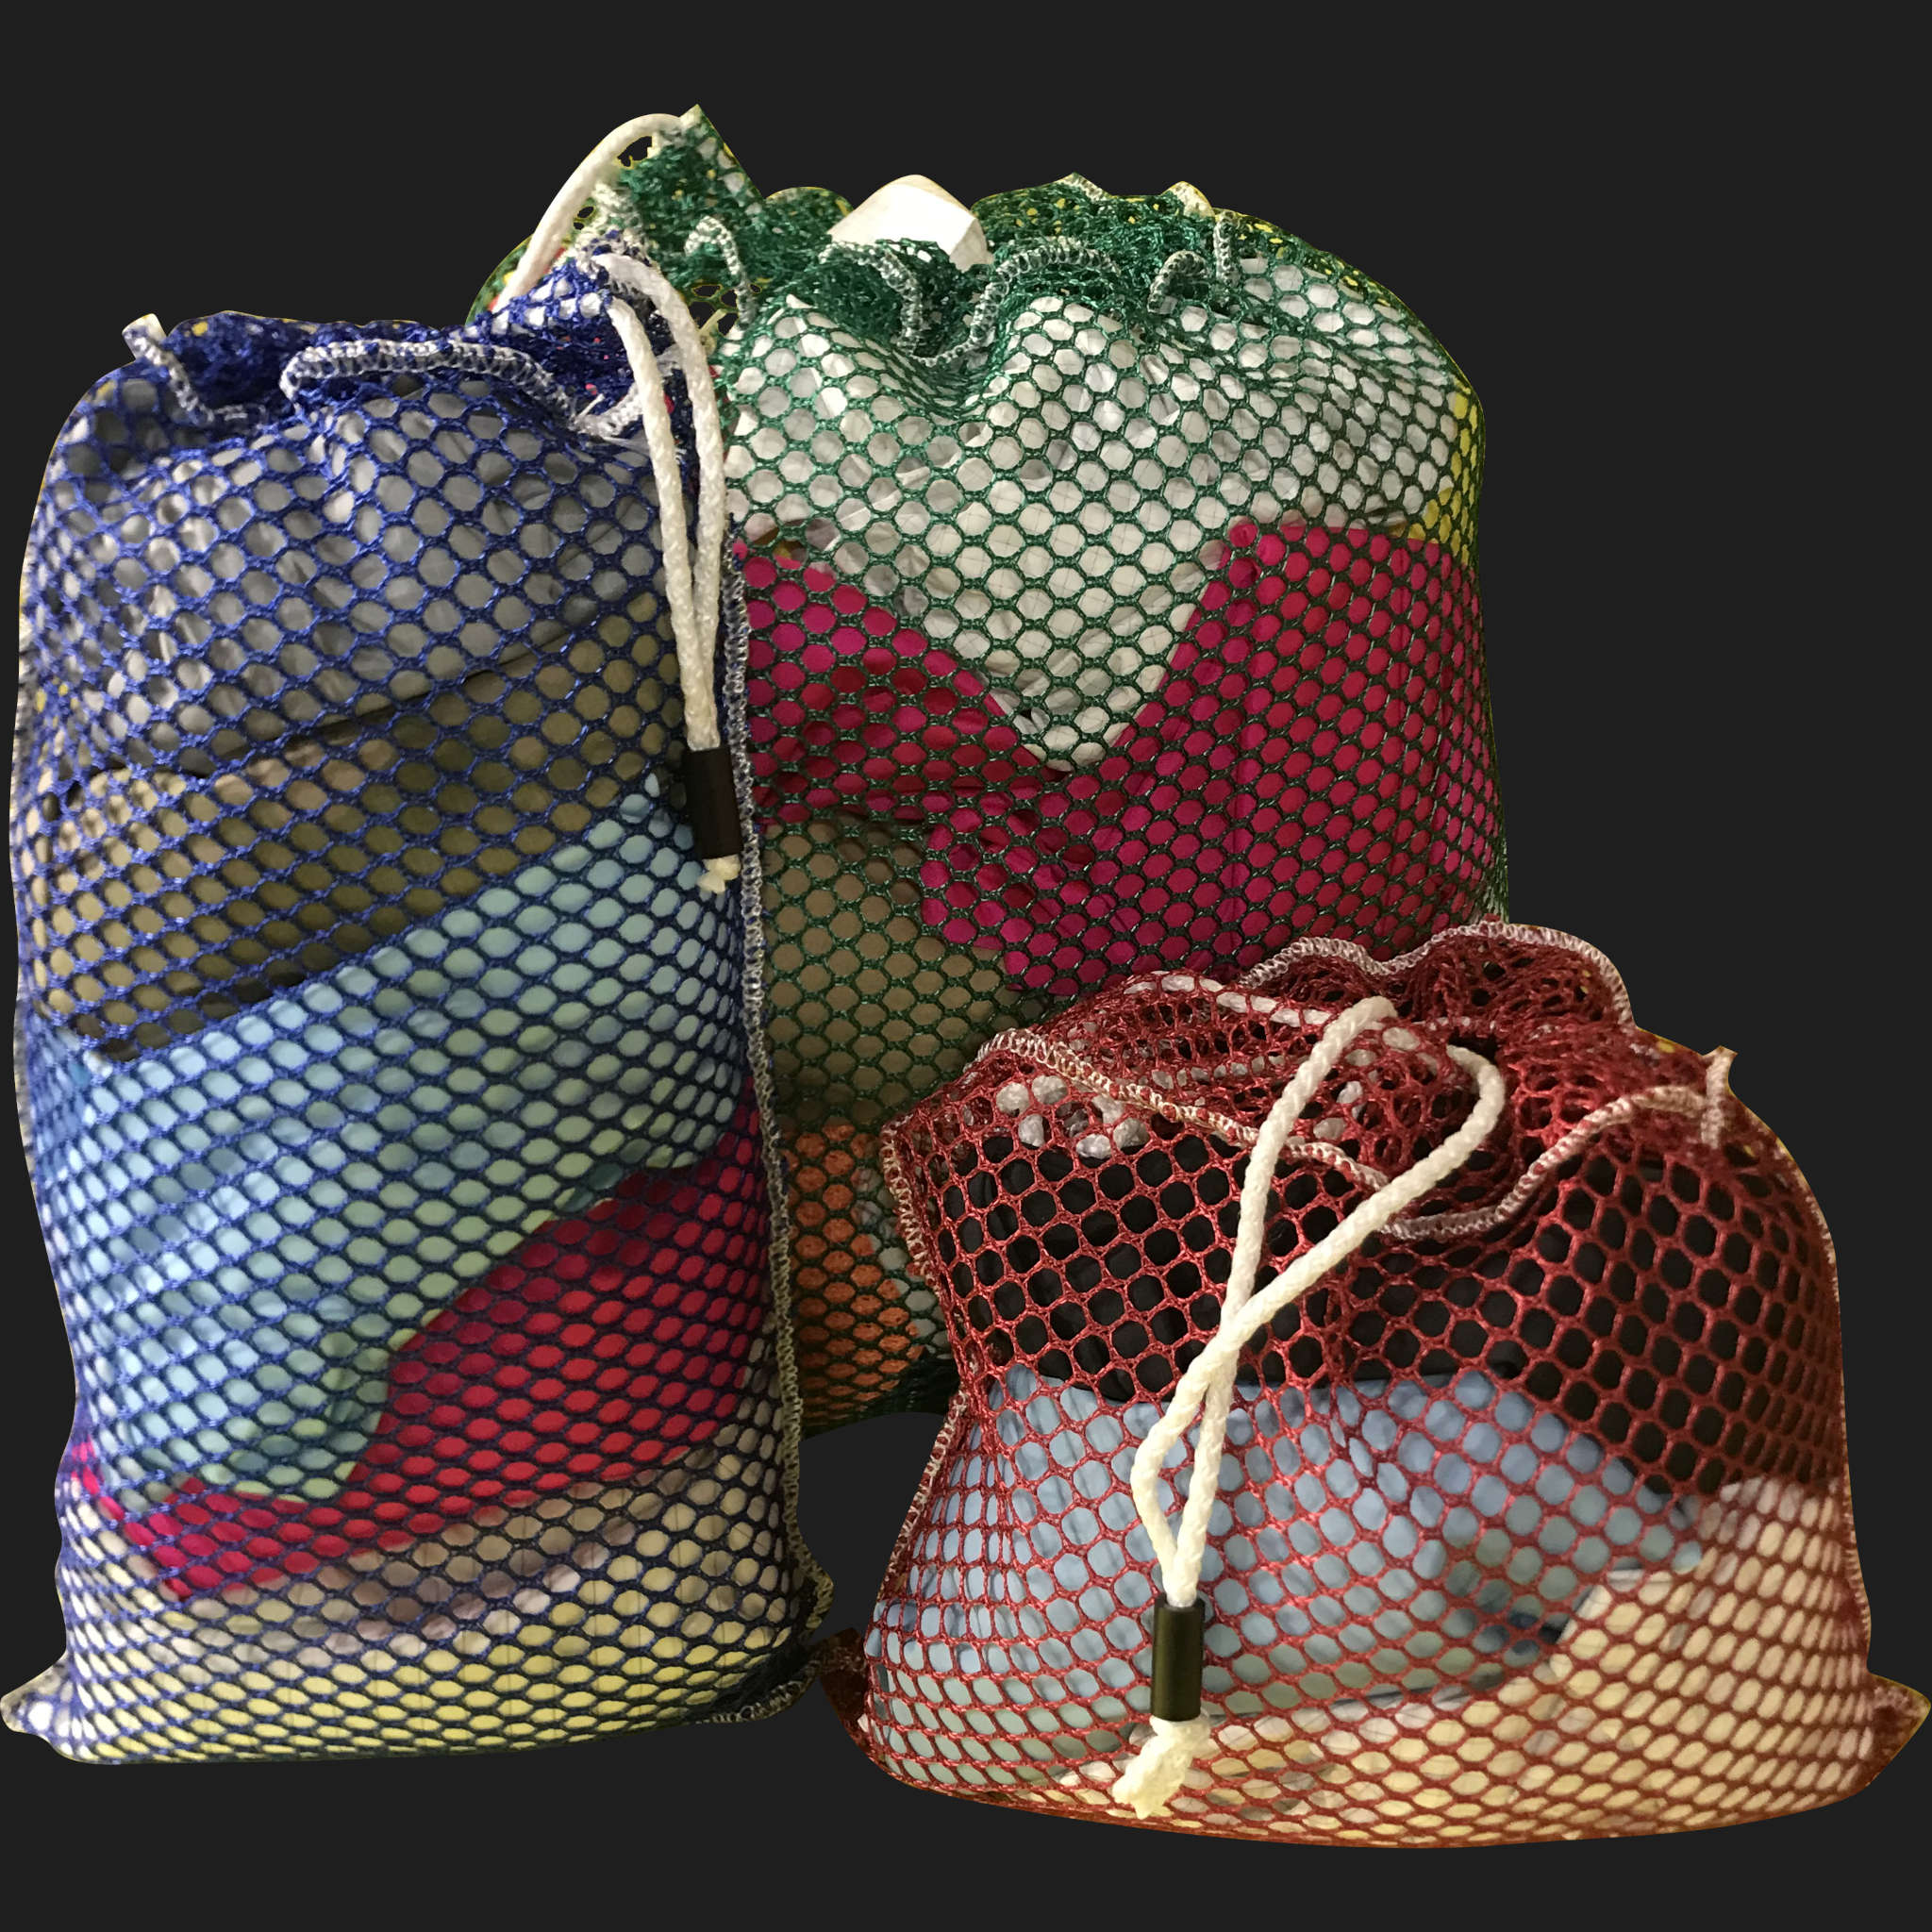 18" x 42" Customized Mesh-Net-Laundry Bags Heavy Duty with Cord and barrellock closure